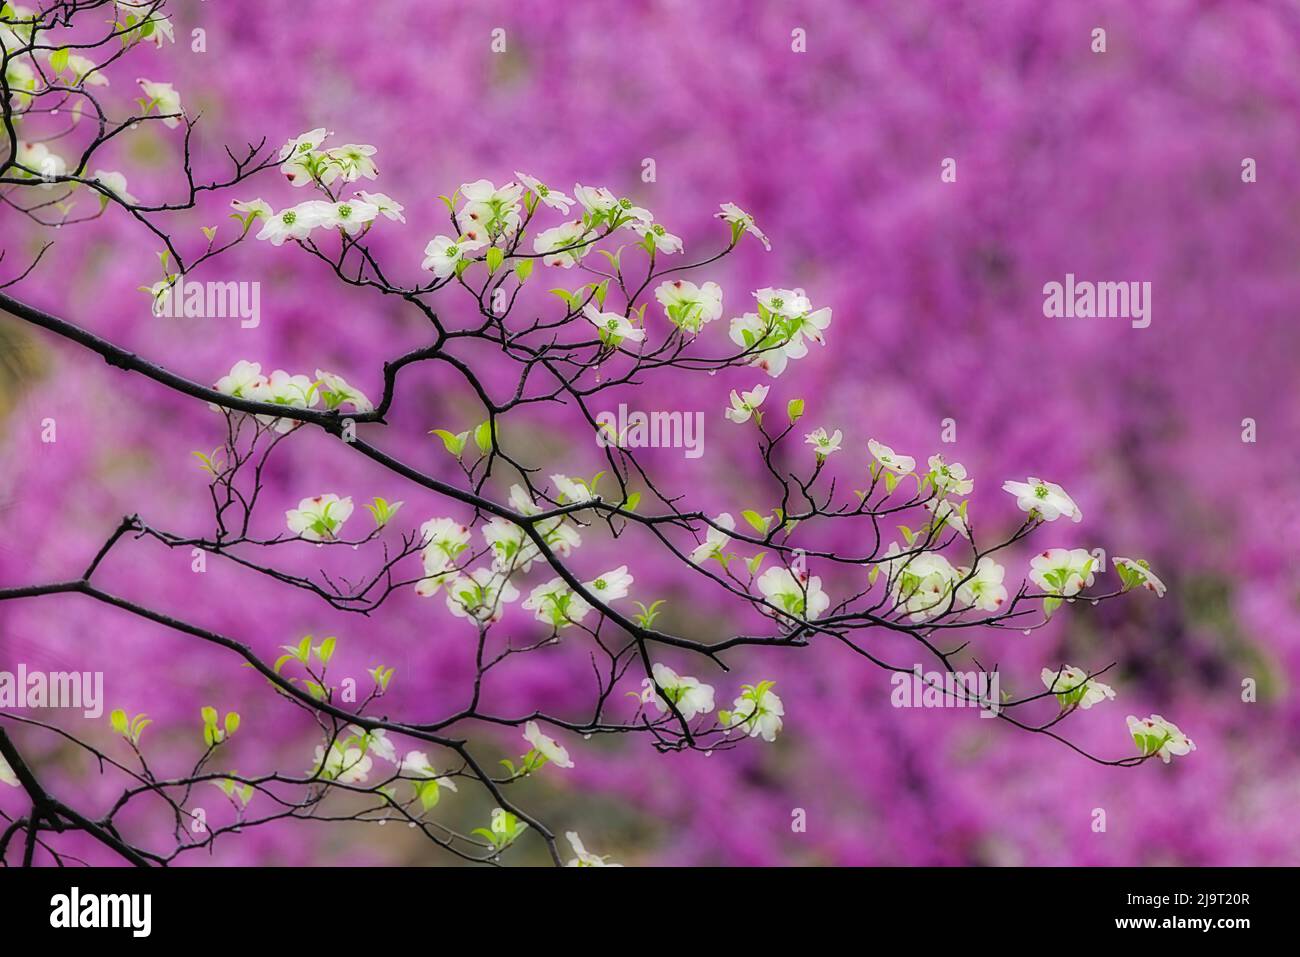 Soft focus view of flowering dogwood tree and distant Eastern redbud, Kentucky Stock Photo